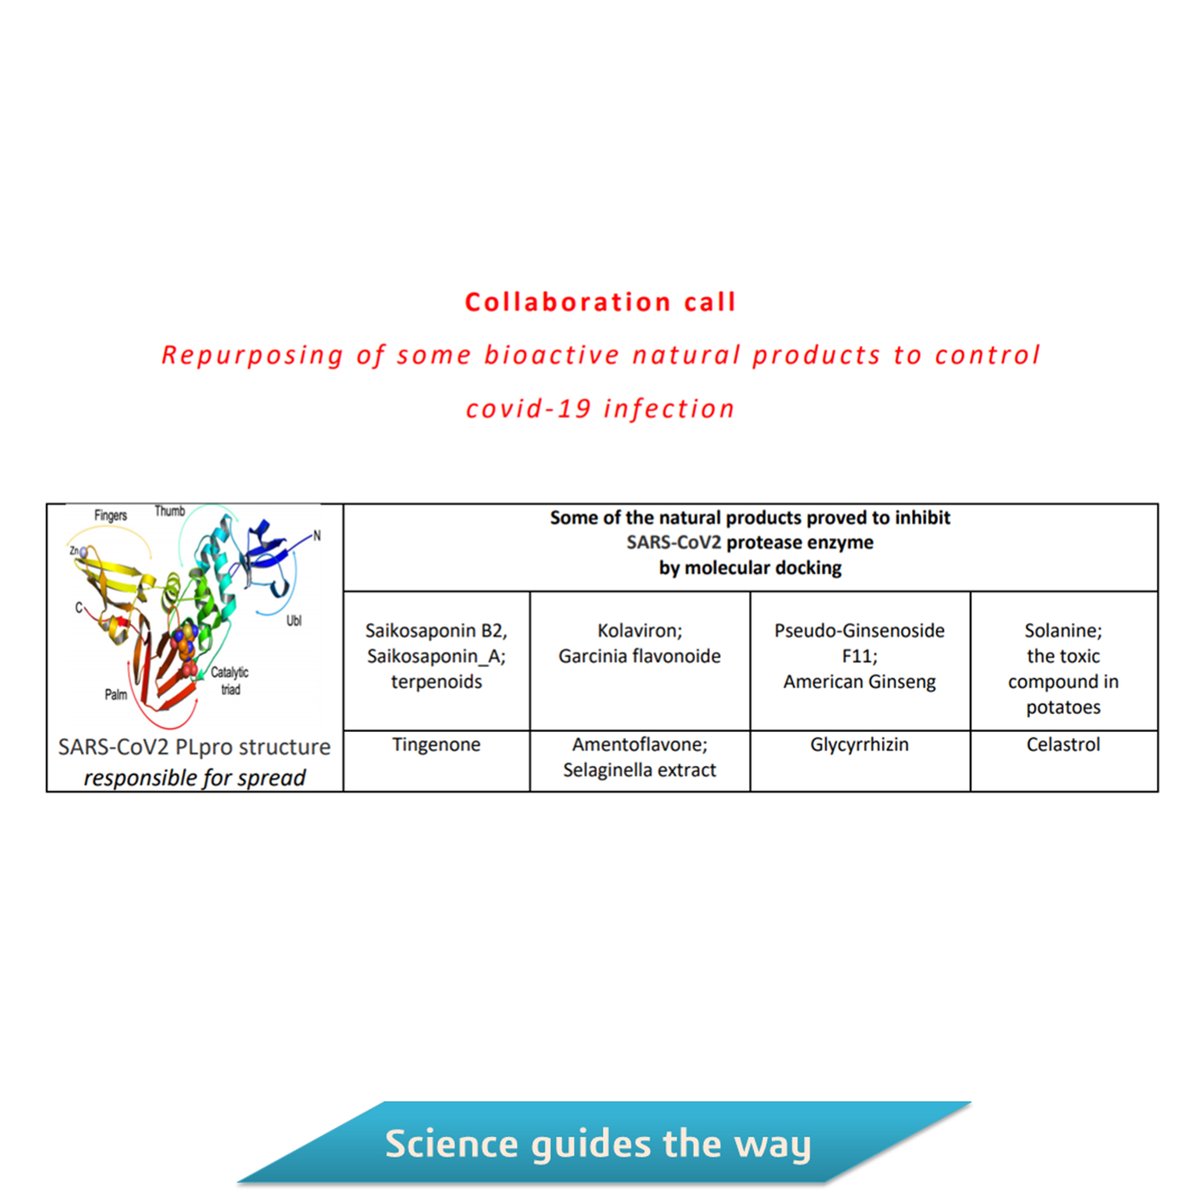 COLLABORATION CALL: REPURPOSING OF SOME BIOACTIVE NATURAL PRODUCTS TO CONTROL COVID-19 INFECTION: A MOLECULAR DOCKING STUDY  

inpst.net/collaboration-… 

#INPST #BIOACTIVE #NATURALPRODUCTS #COVID19 #INFECTION #MOLECULARDOCKING #globalhealth #OpenScience #scicomm #WomenInSTEM #STEM